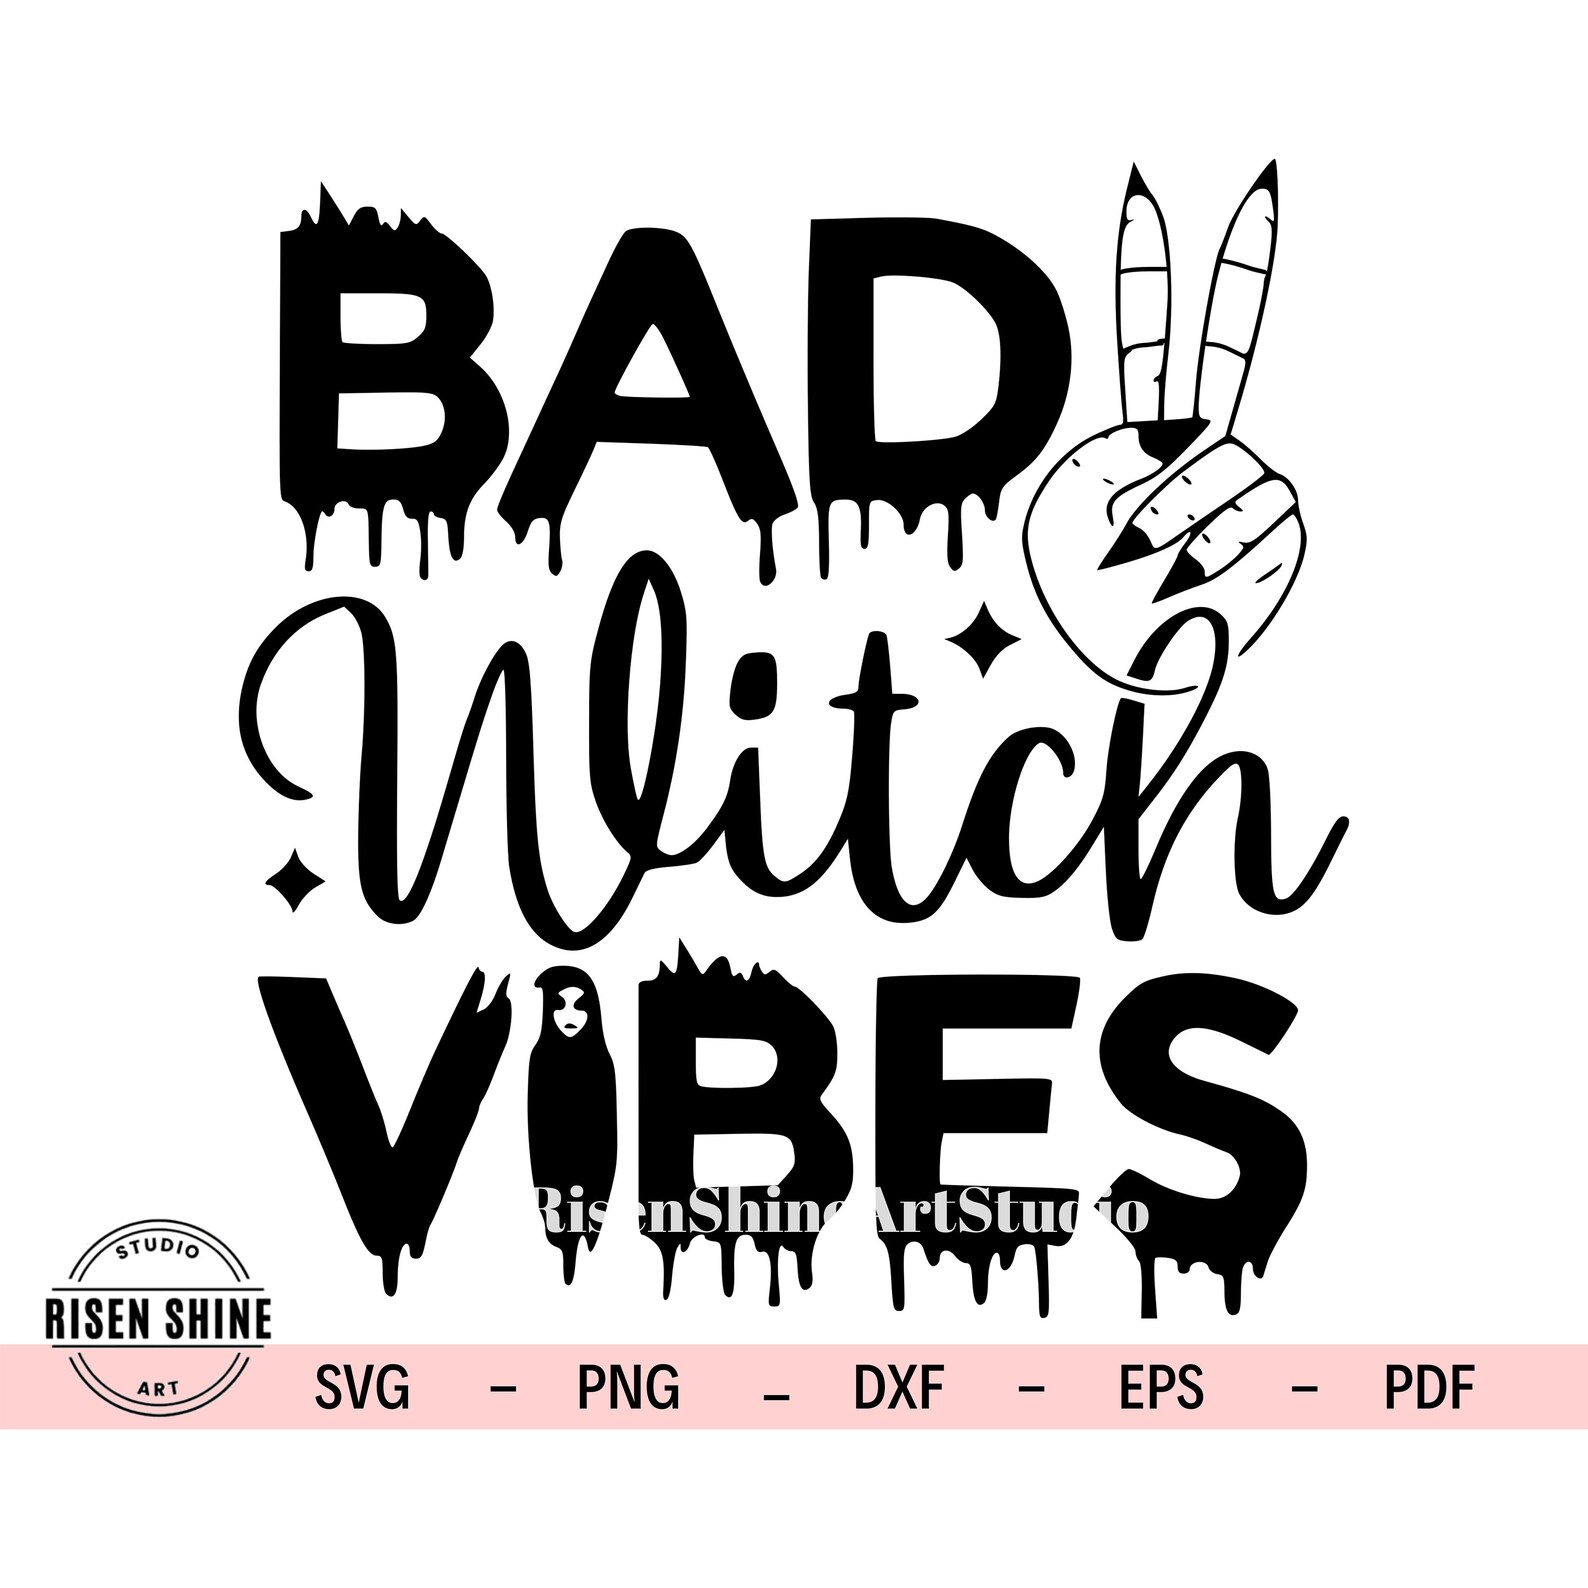 Bad witch vibes svg